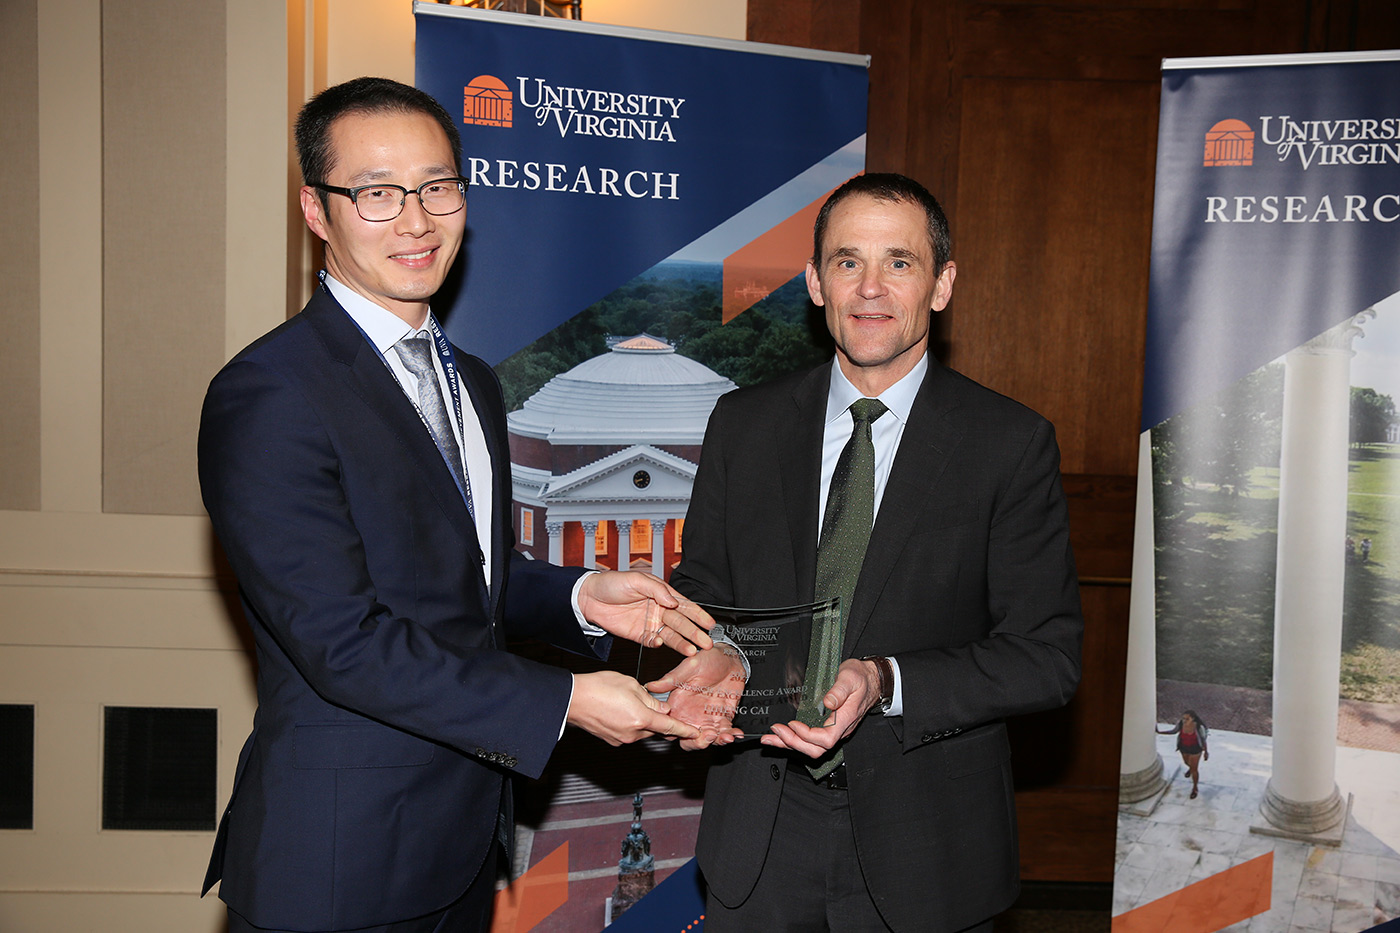 From left to right: Assistant professor Liheng Cai and President Jim Ryan.